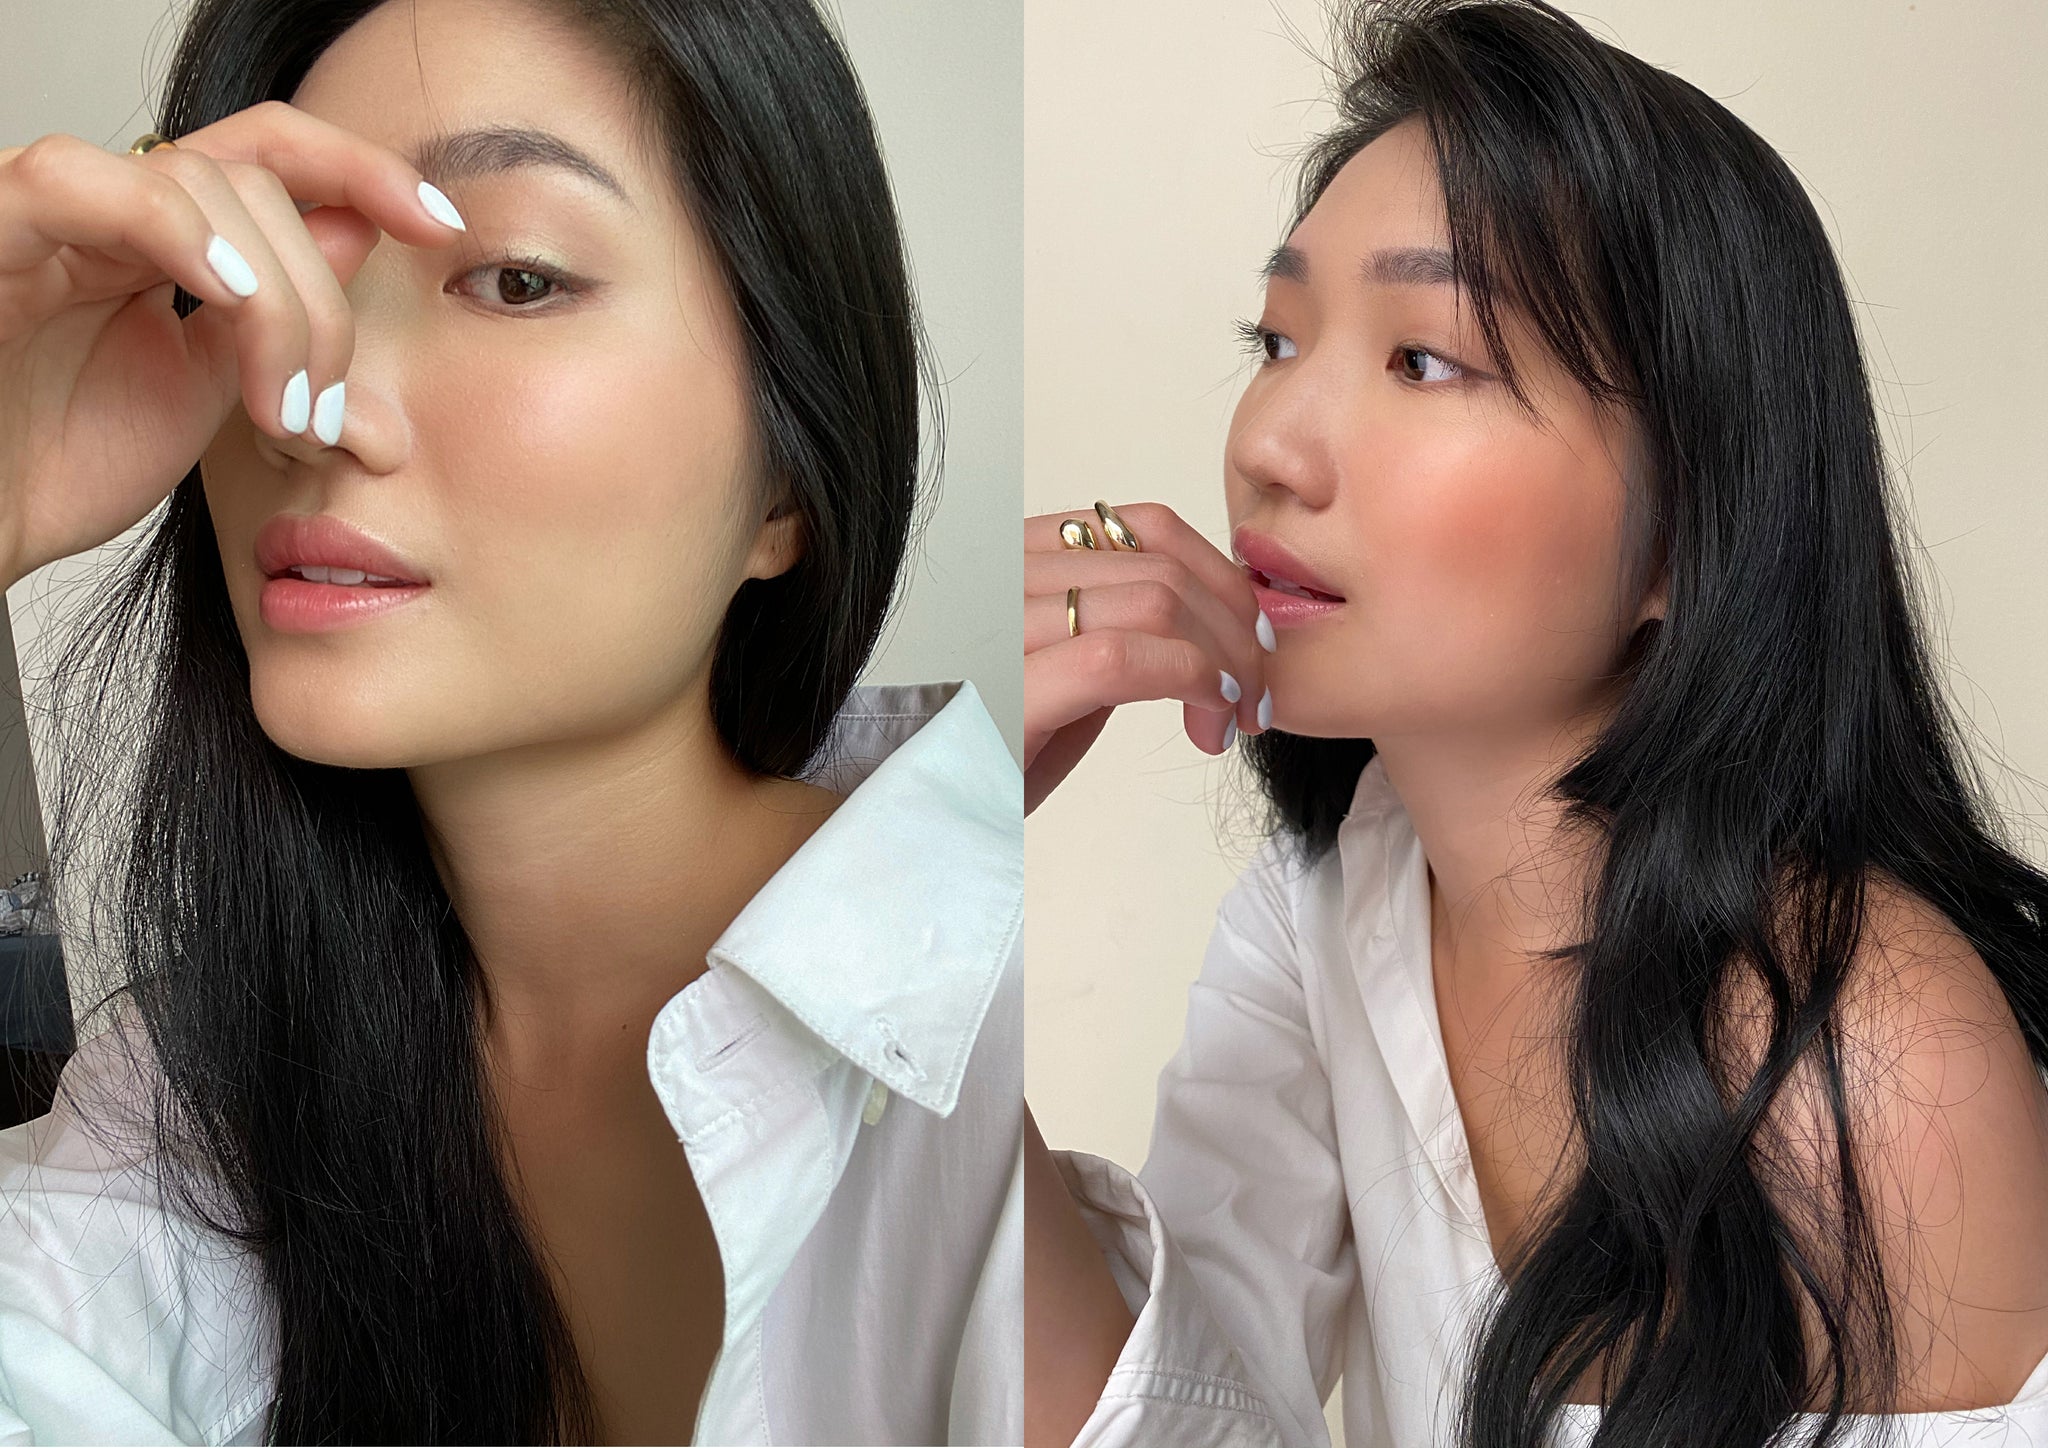 Everyday Makeup To Look Fresh in 5 Minutes